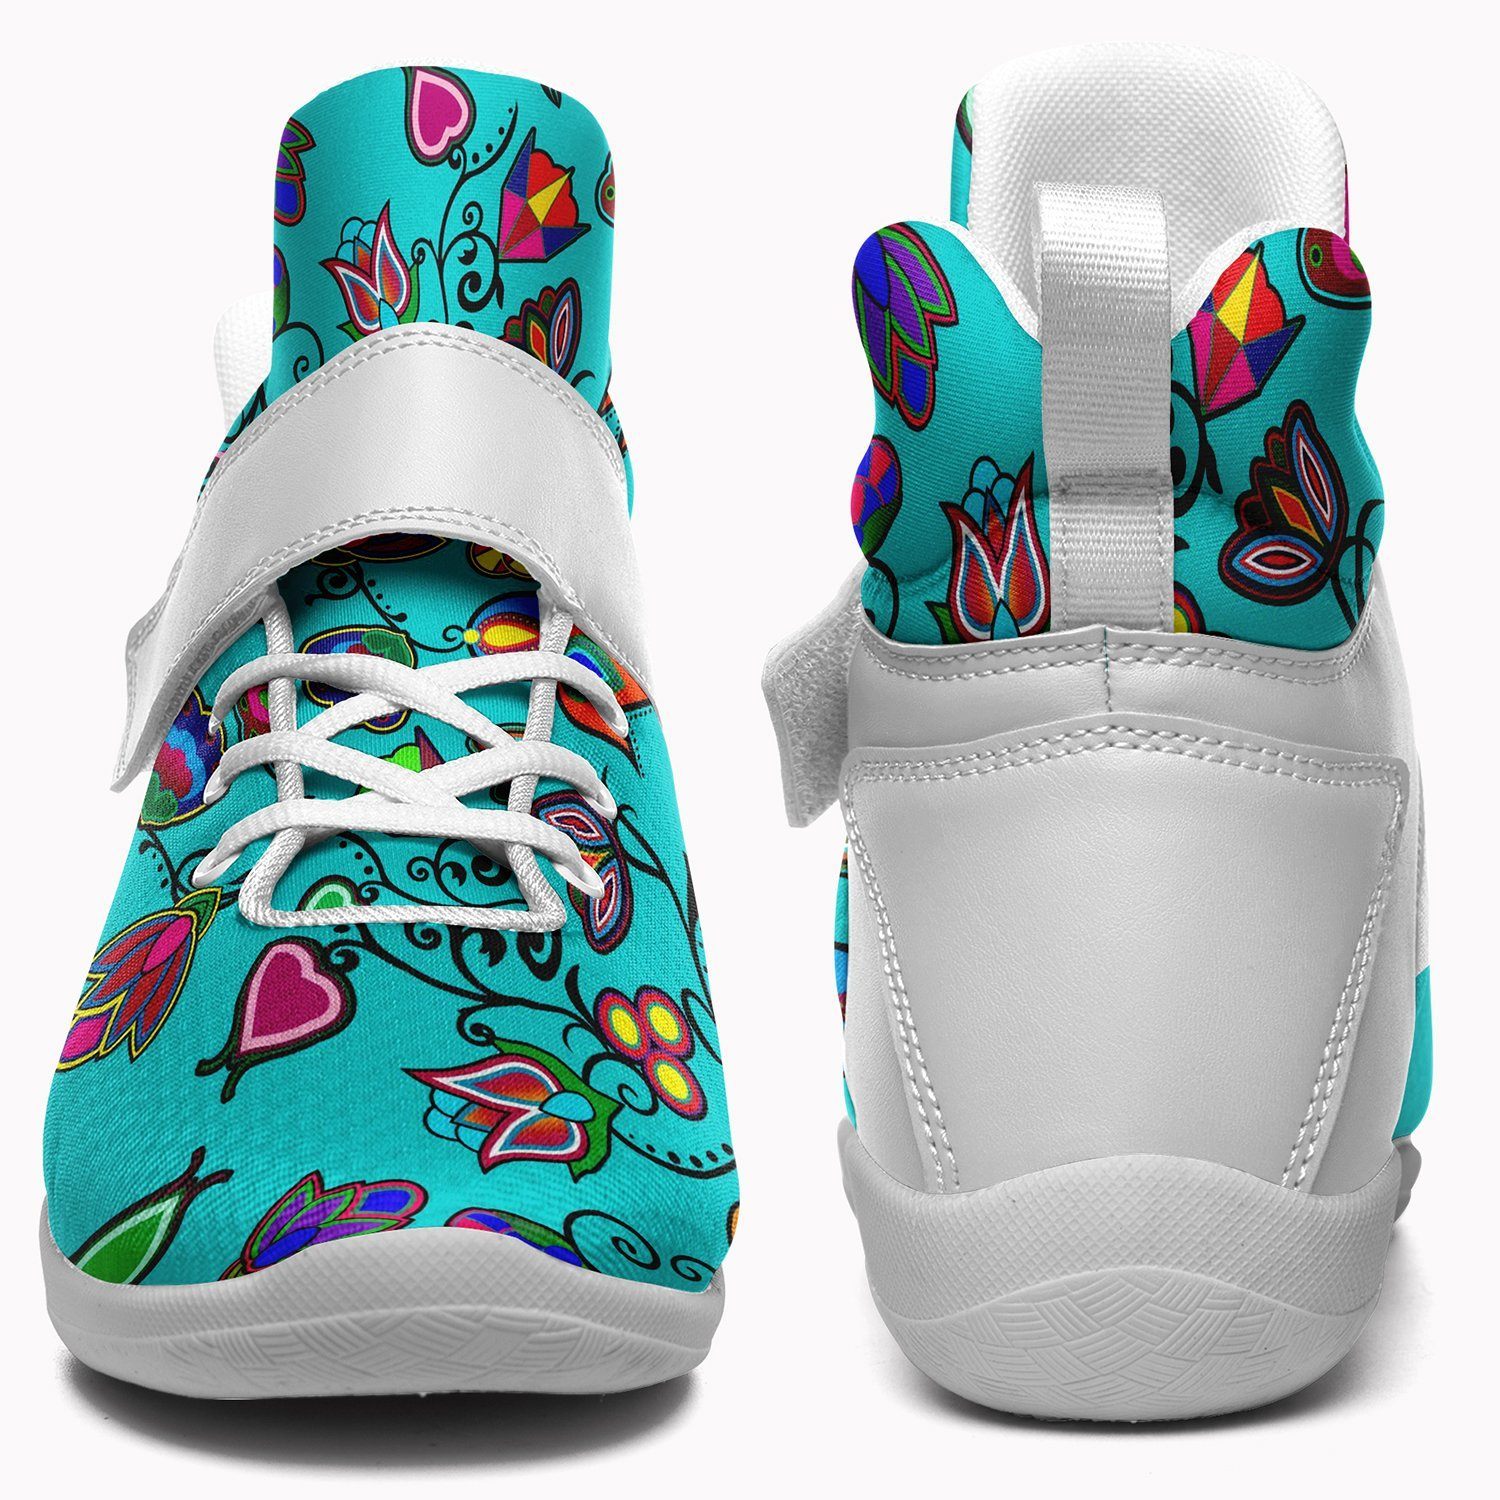 Indigenous Paisley Sky Ipottaa Basketball / Sport High Top Shoes - White Sole 49 Dzine 